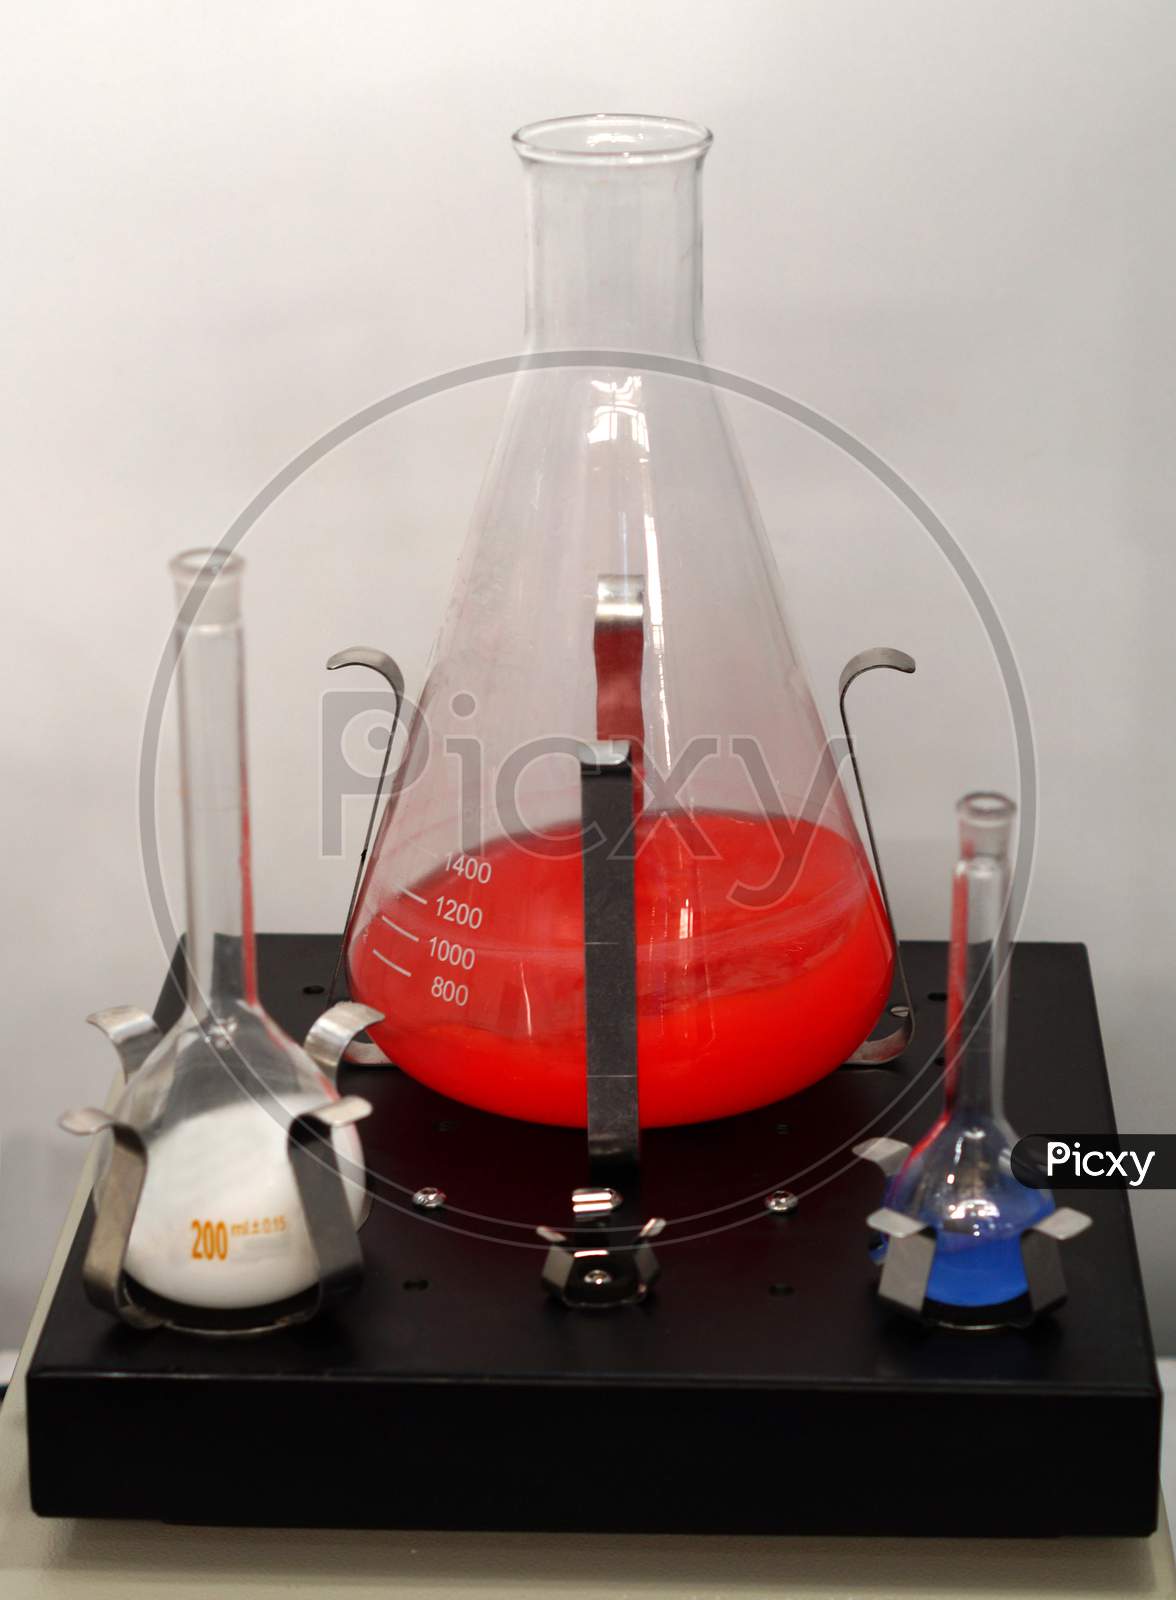 View Of Electric Magnetic Stirrer Equipment To Stirr Solutions In Chemical Or Pharma Laboratory